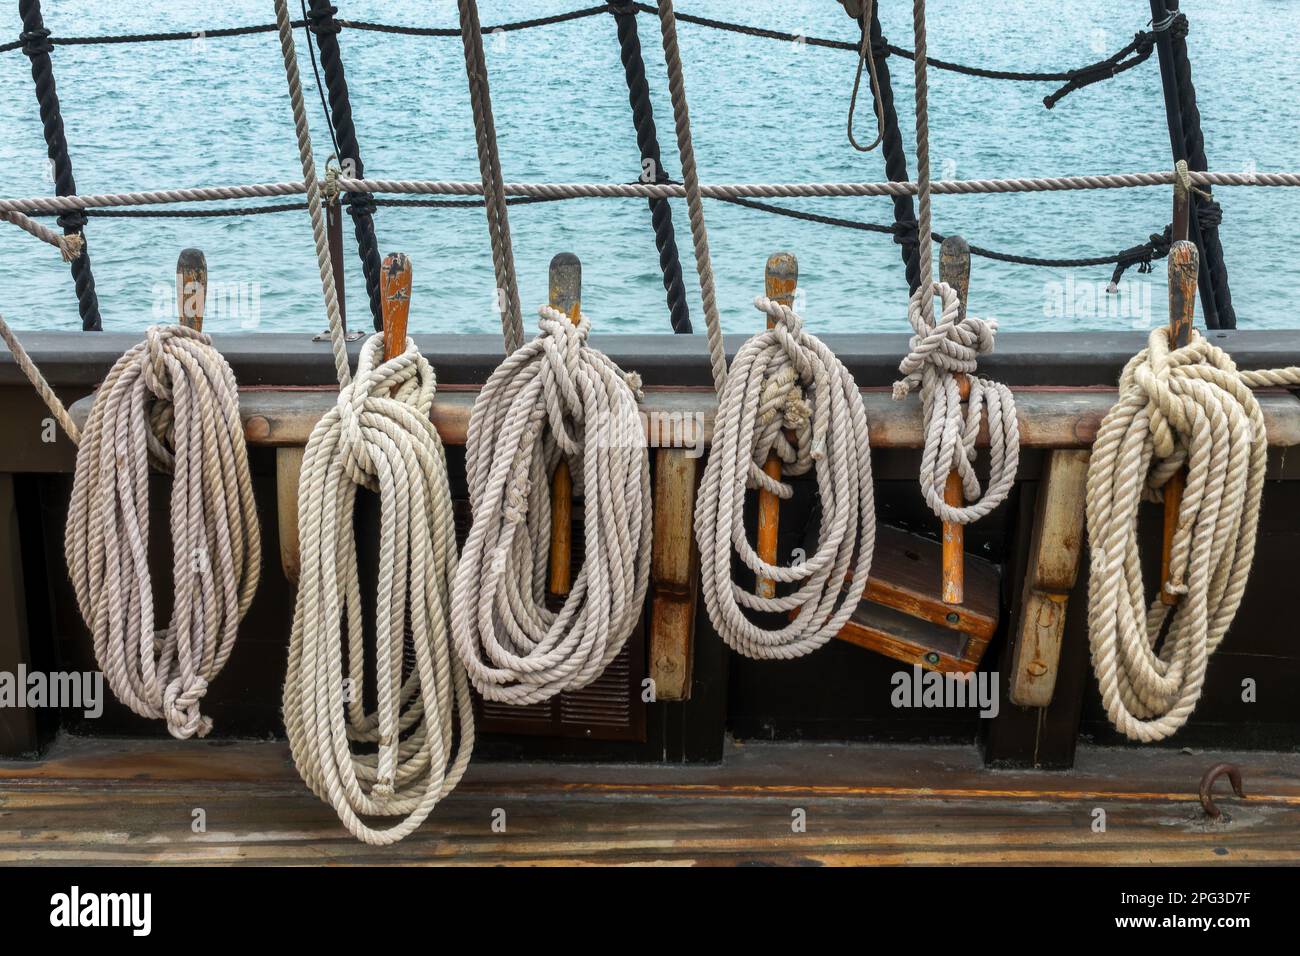 https://c8.alamy.com/comp/2PG3D7F/mooring-ropes-on-the-deck-of-the-san-salvador-historic-sailing-ship-in-san-diego-2PG3D7F.jpg